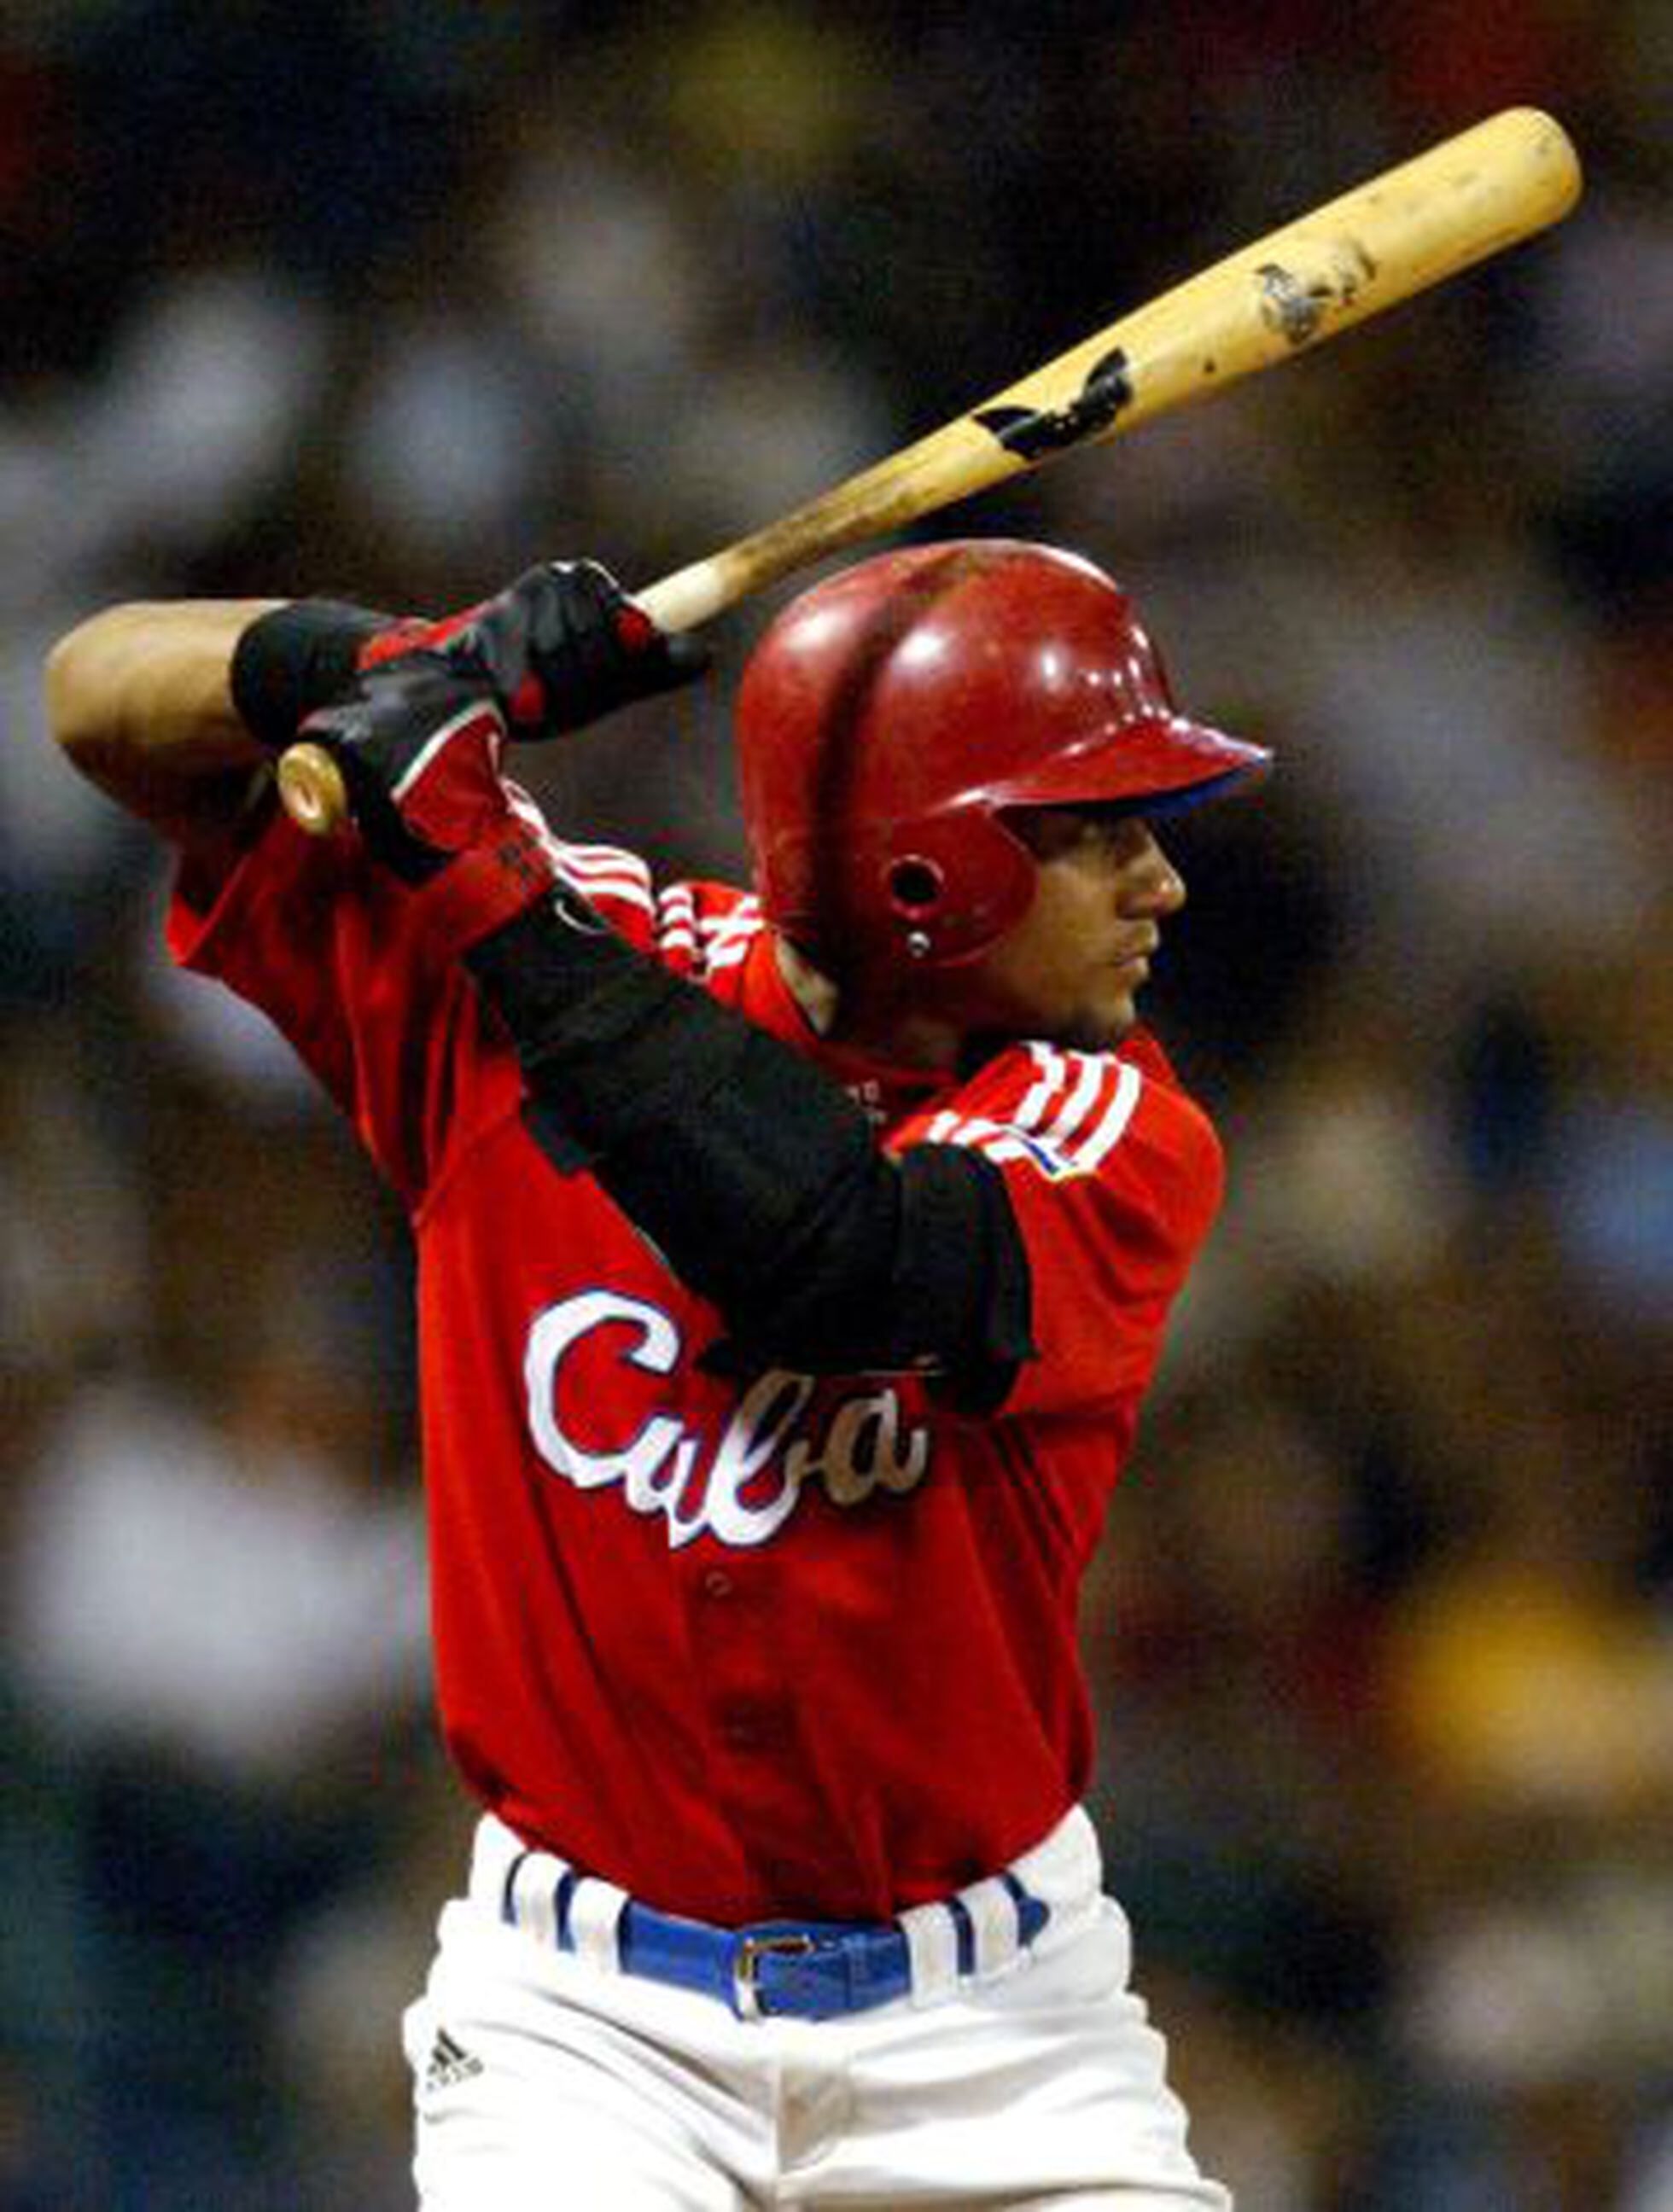 Cuban defections Cuba’s star baseball player defects to reportedly